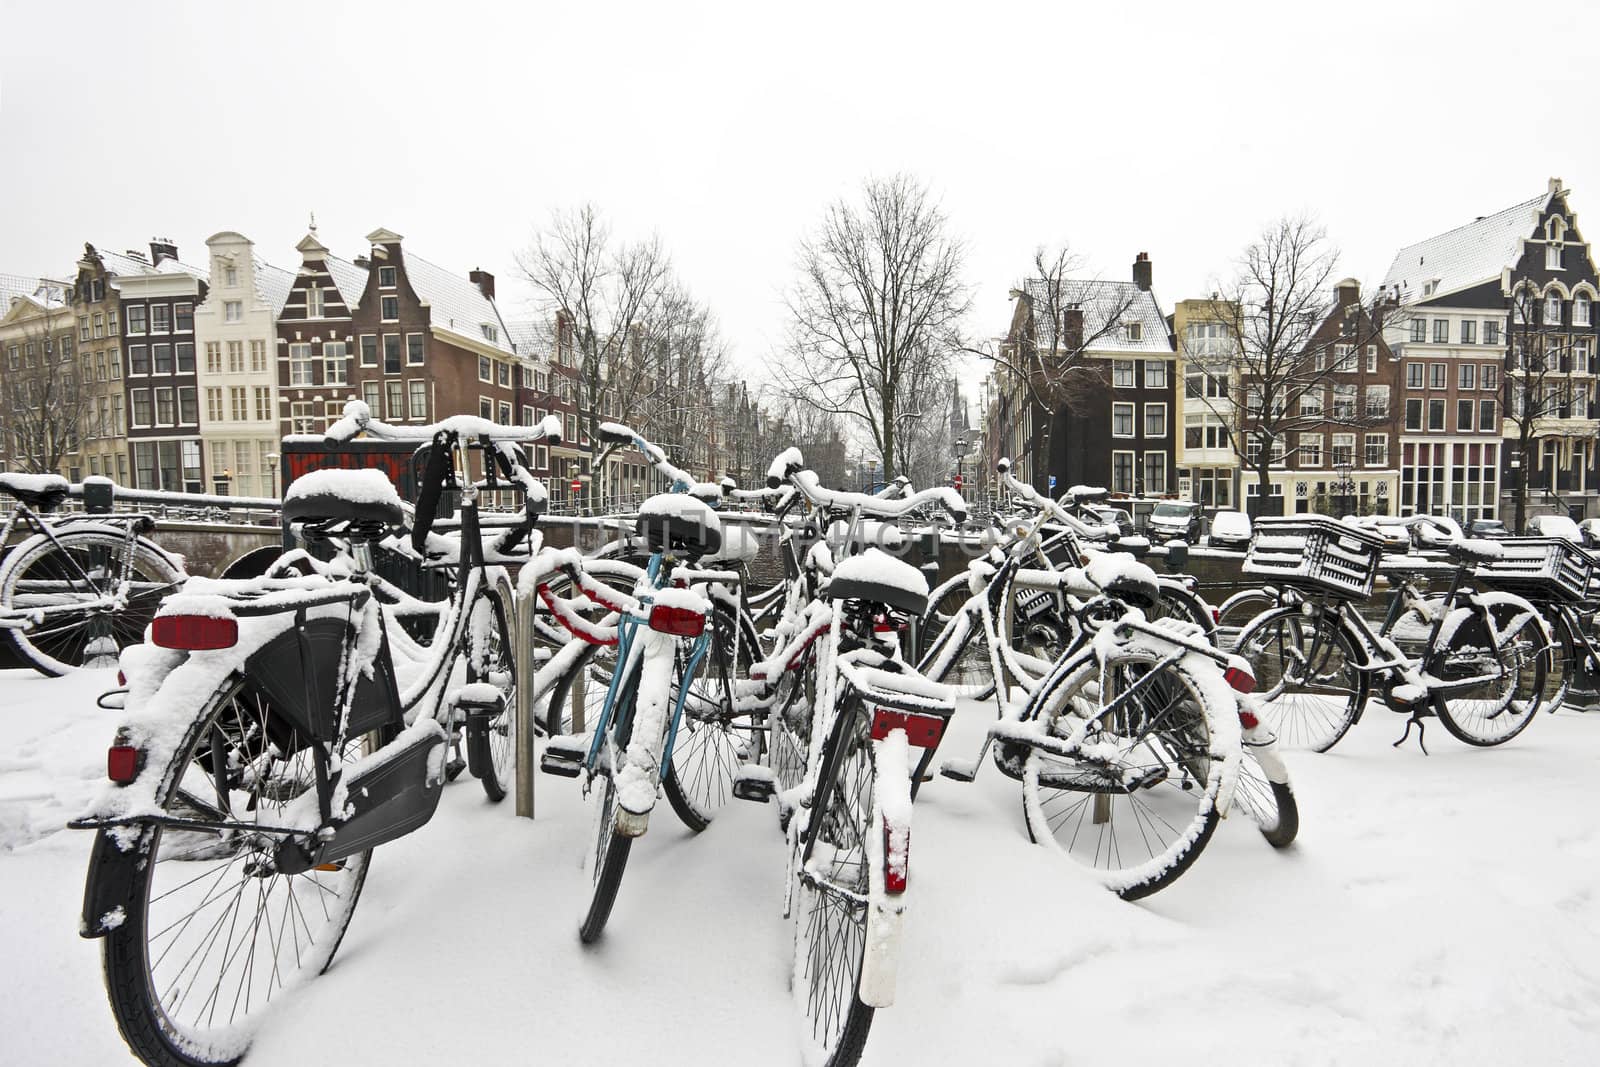 Snowy bikes in Amsterdam the Netherlands by devy